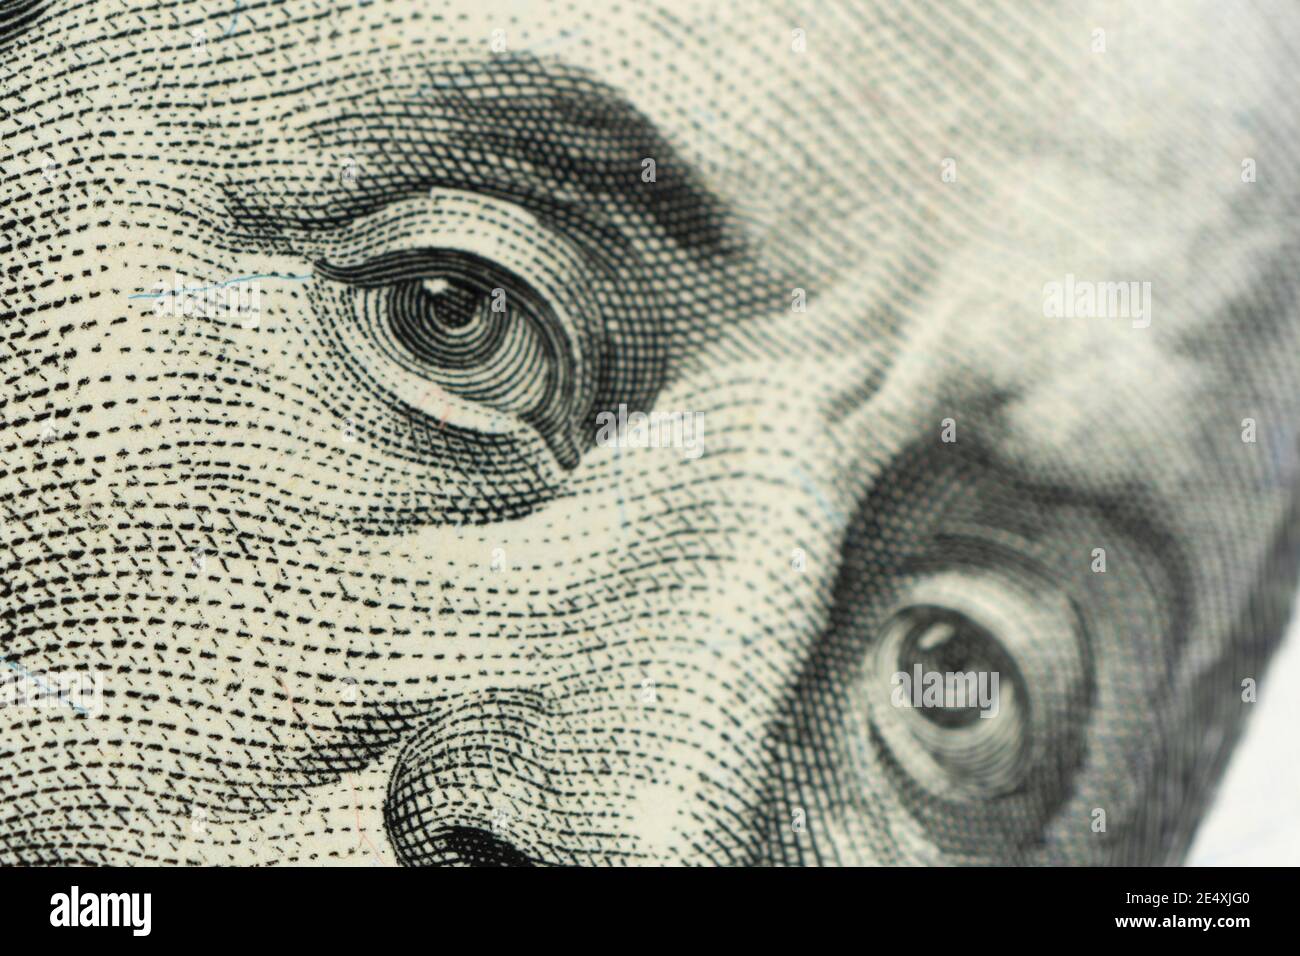 Extreme close-up of one hundred bill Franklin portrait. focus on eyes. Stock Photo